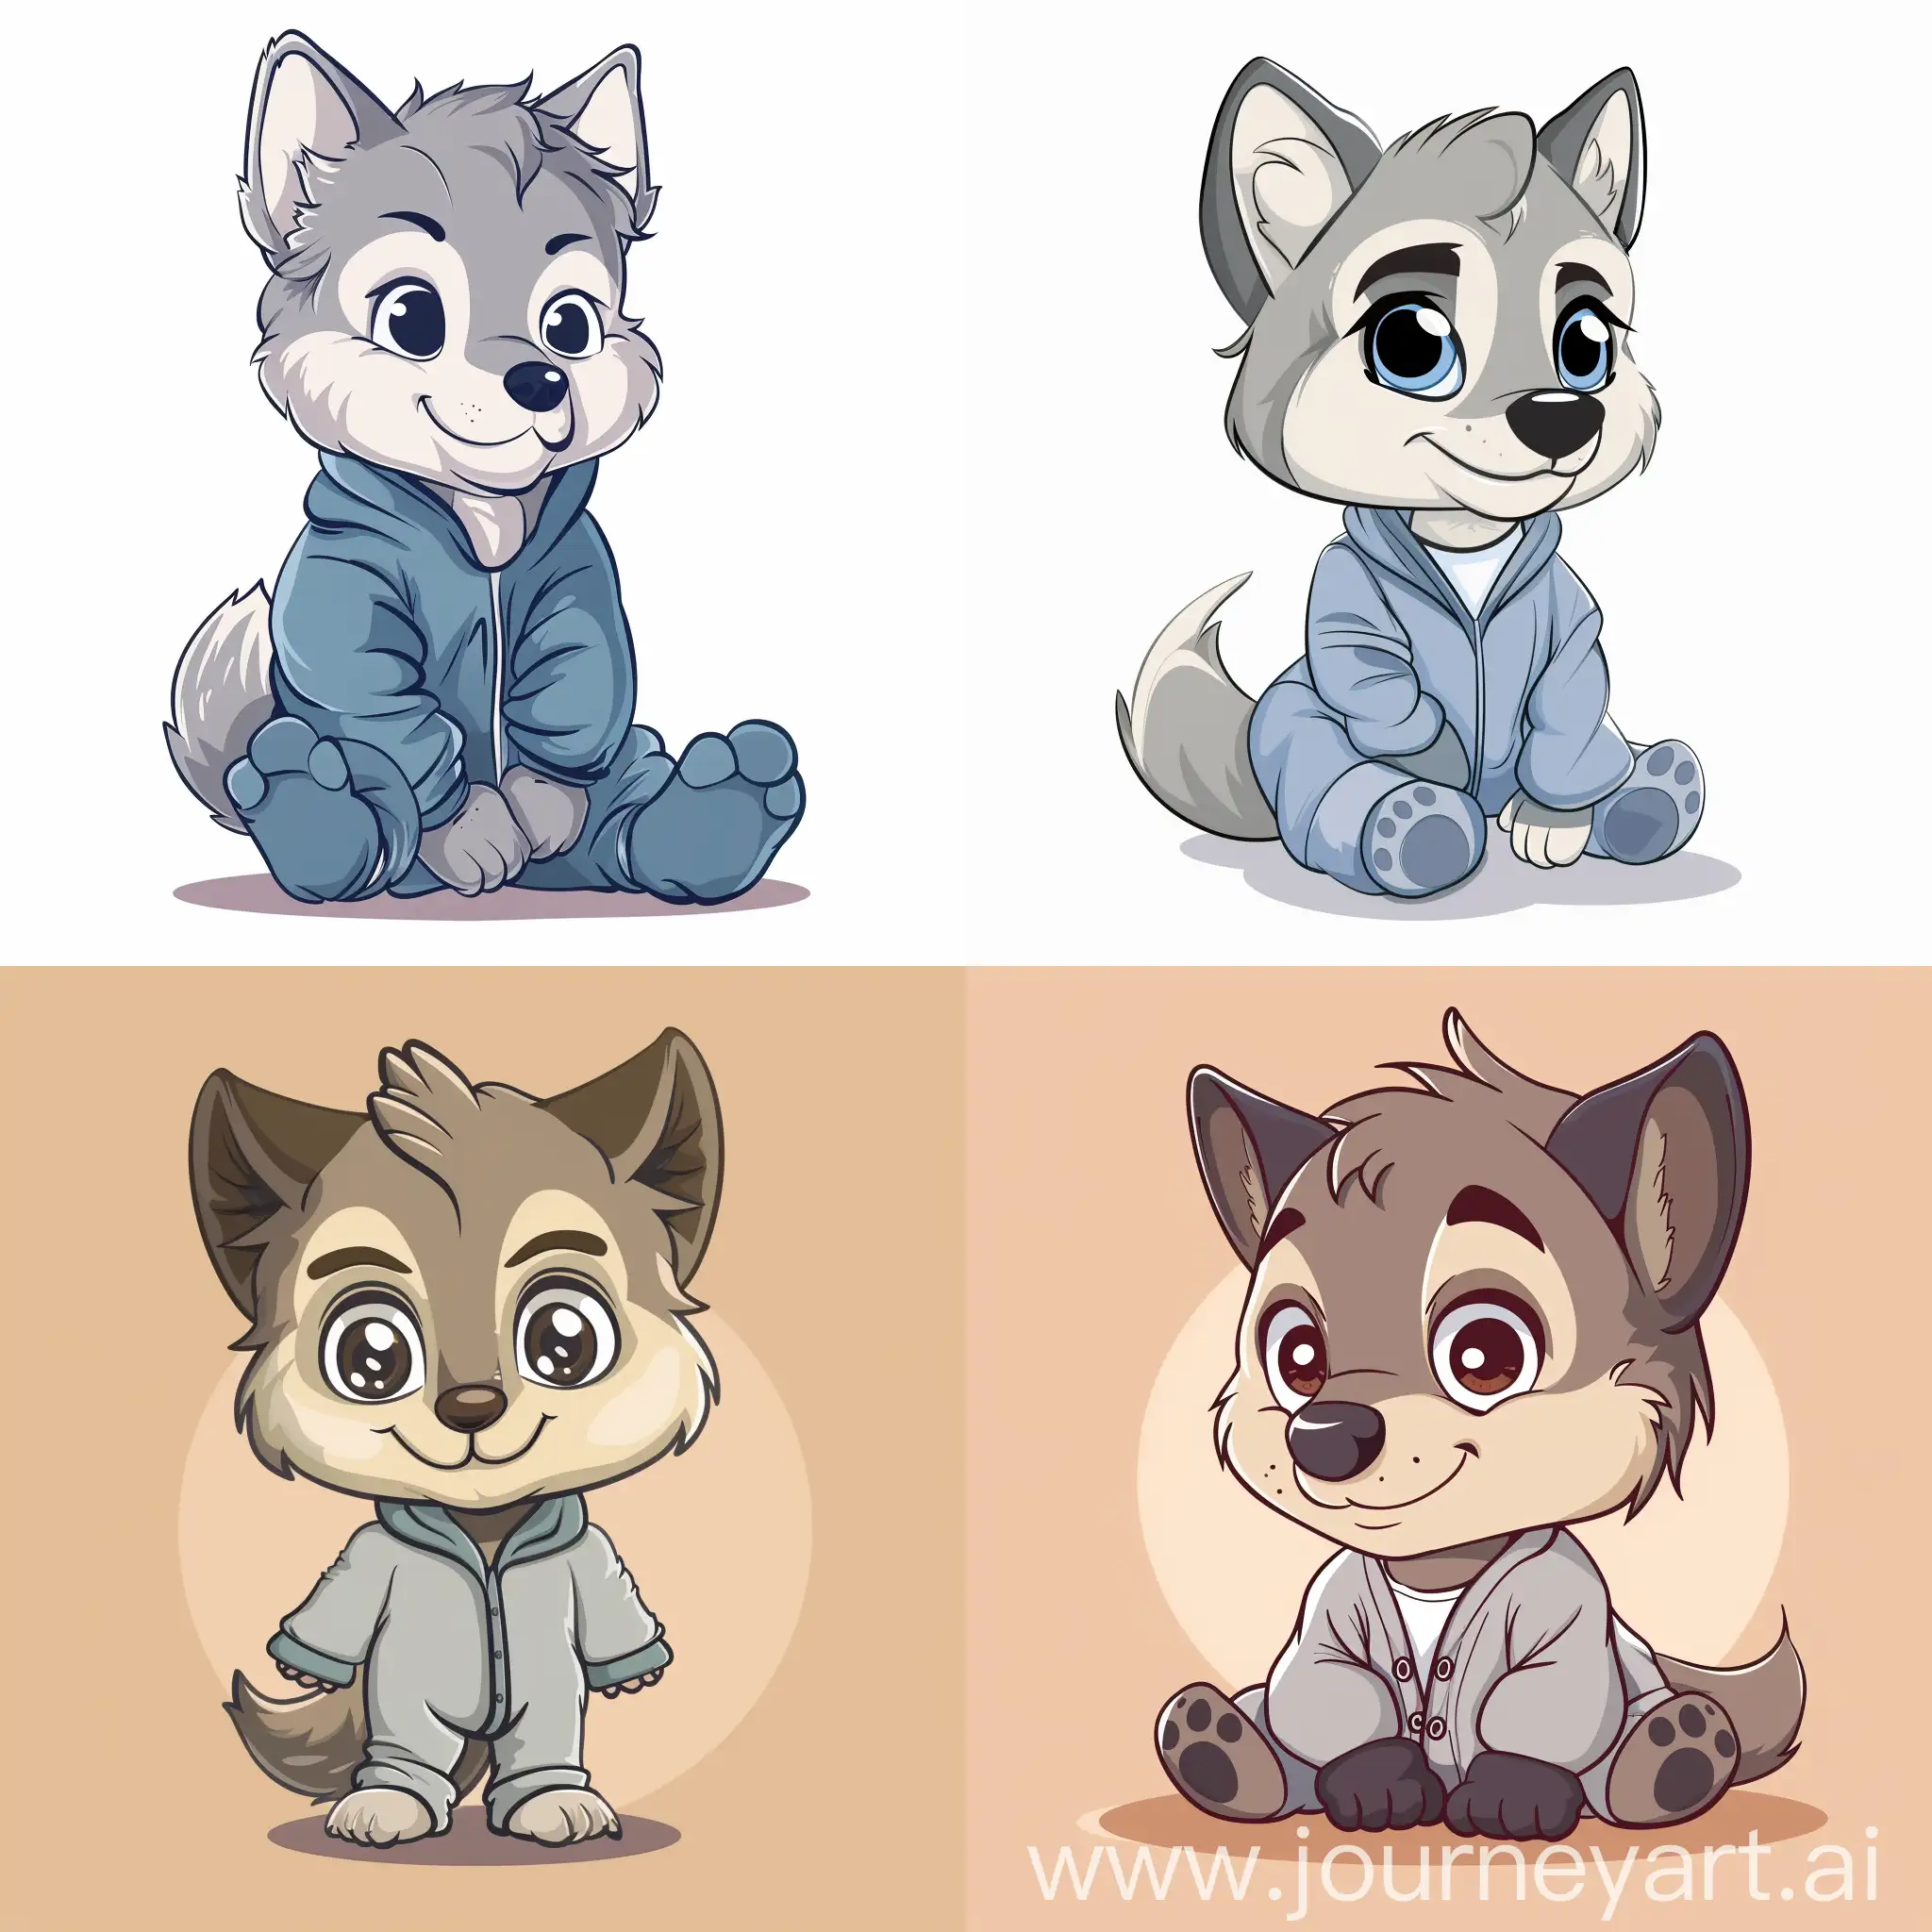 Cartoon of a baby Wolf cub in a sleep suit